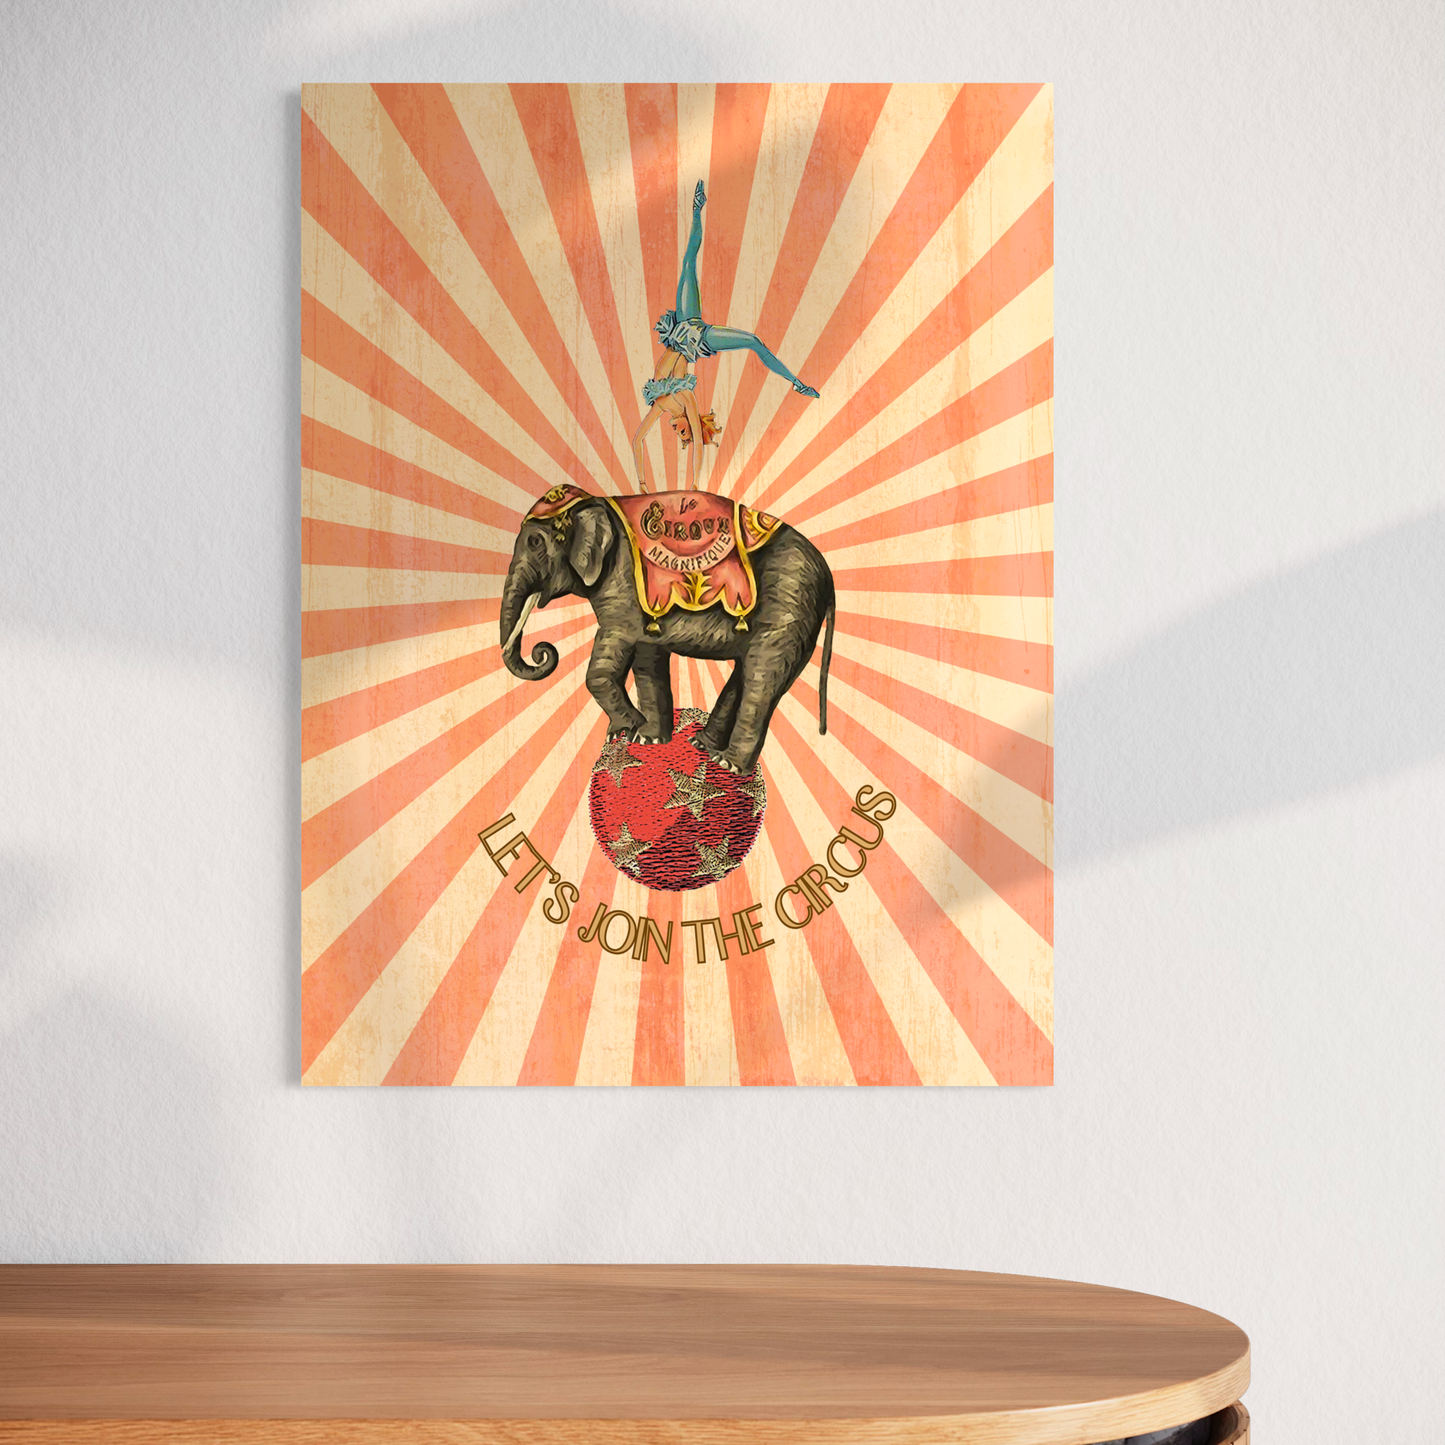 Poster Prints "Let's Join the Circus II"